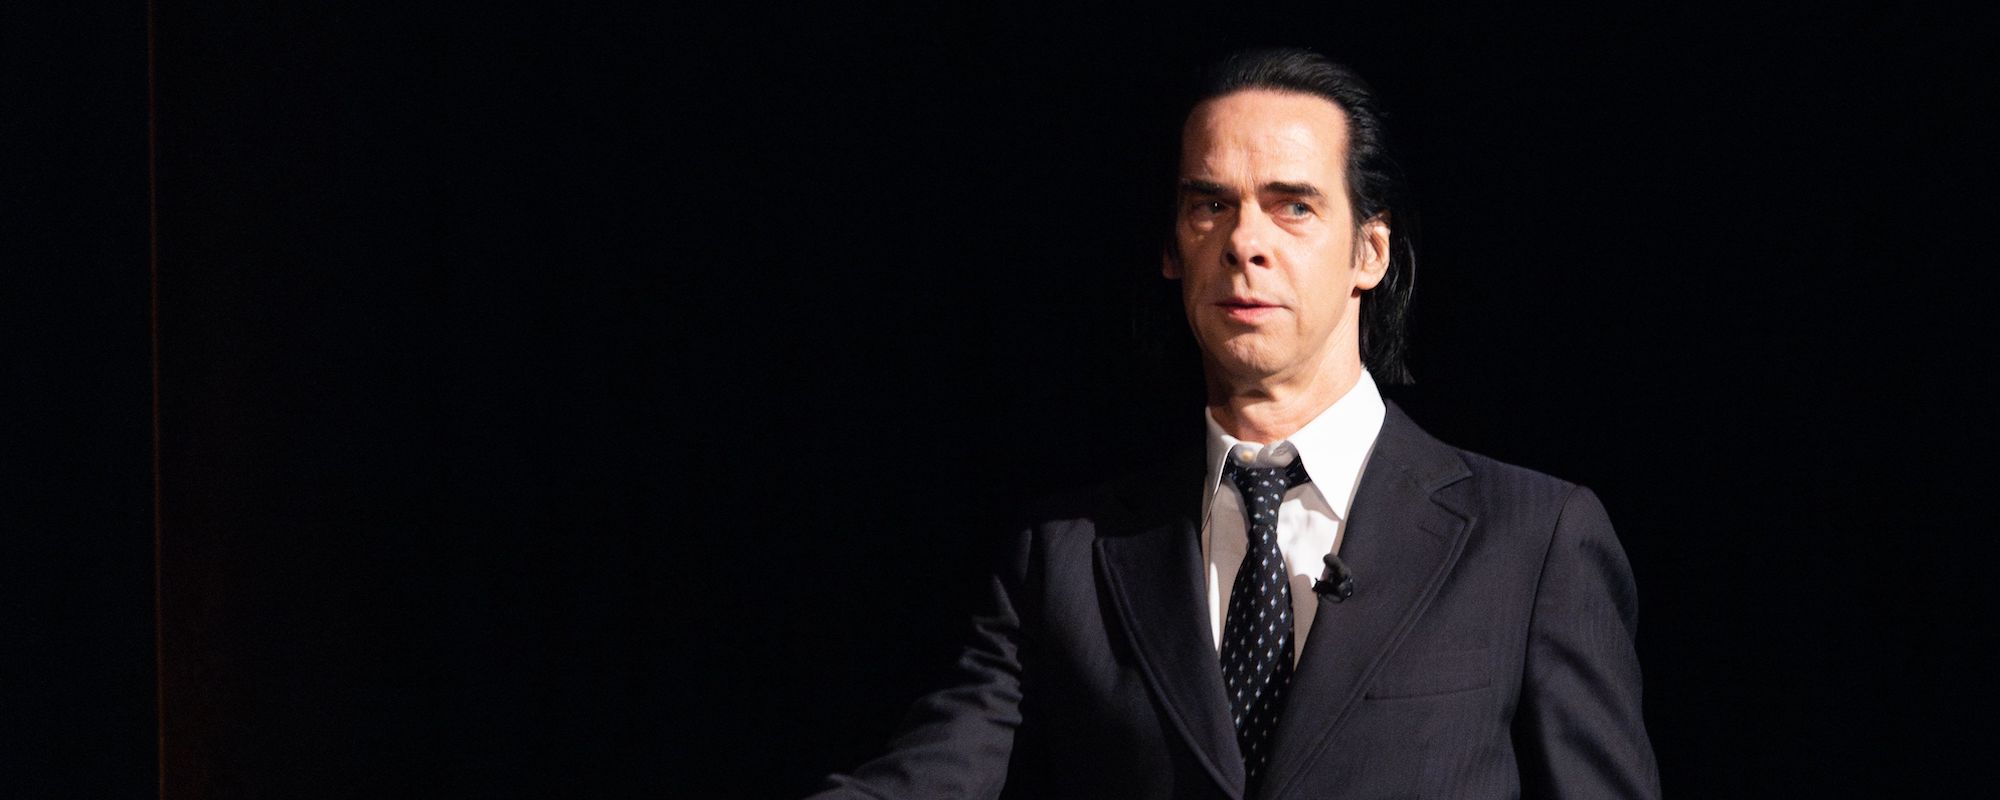 Nick Cave Performs The Pogues’ 1986 Song “Rainy Night in Soho” at Shane MacGowan’s Funeral, Johnny Depp Reads Passage